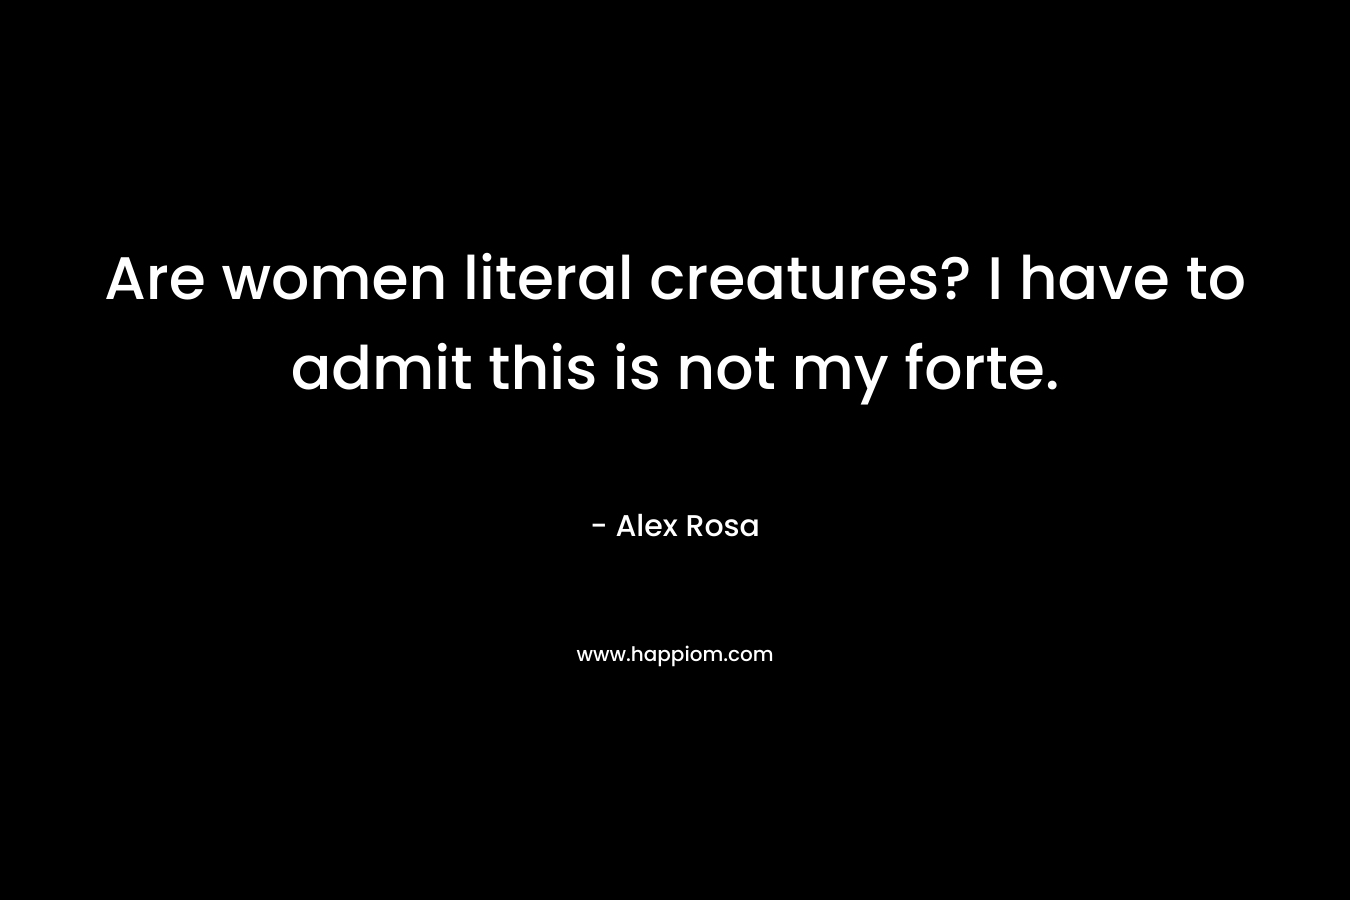 Are women literal creatures? I have to admit this is not my forte.